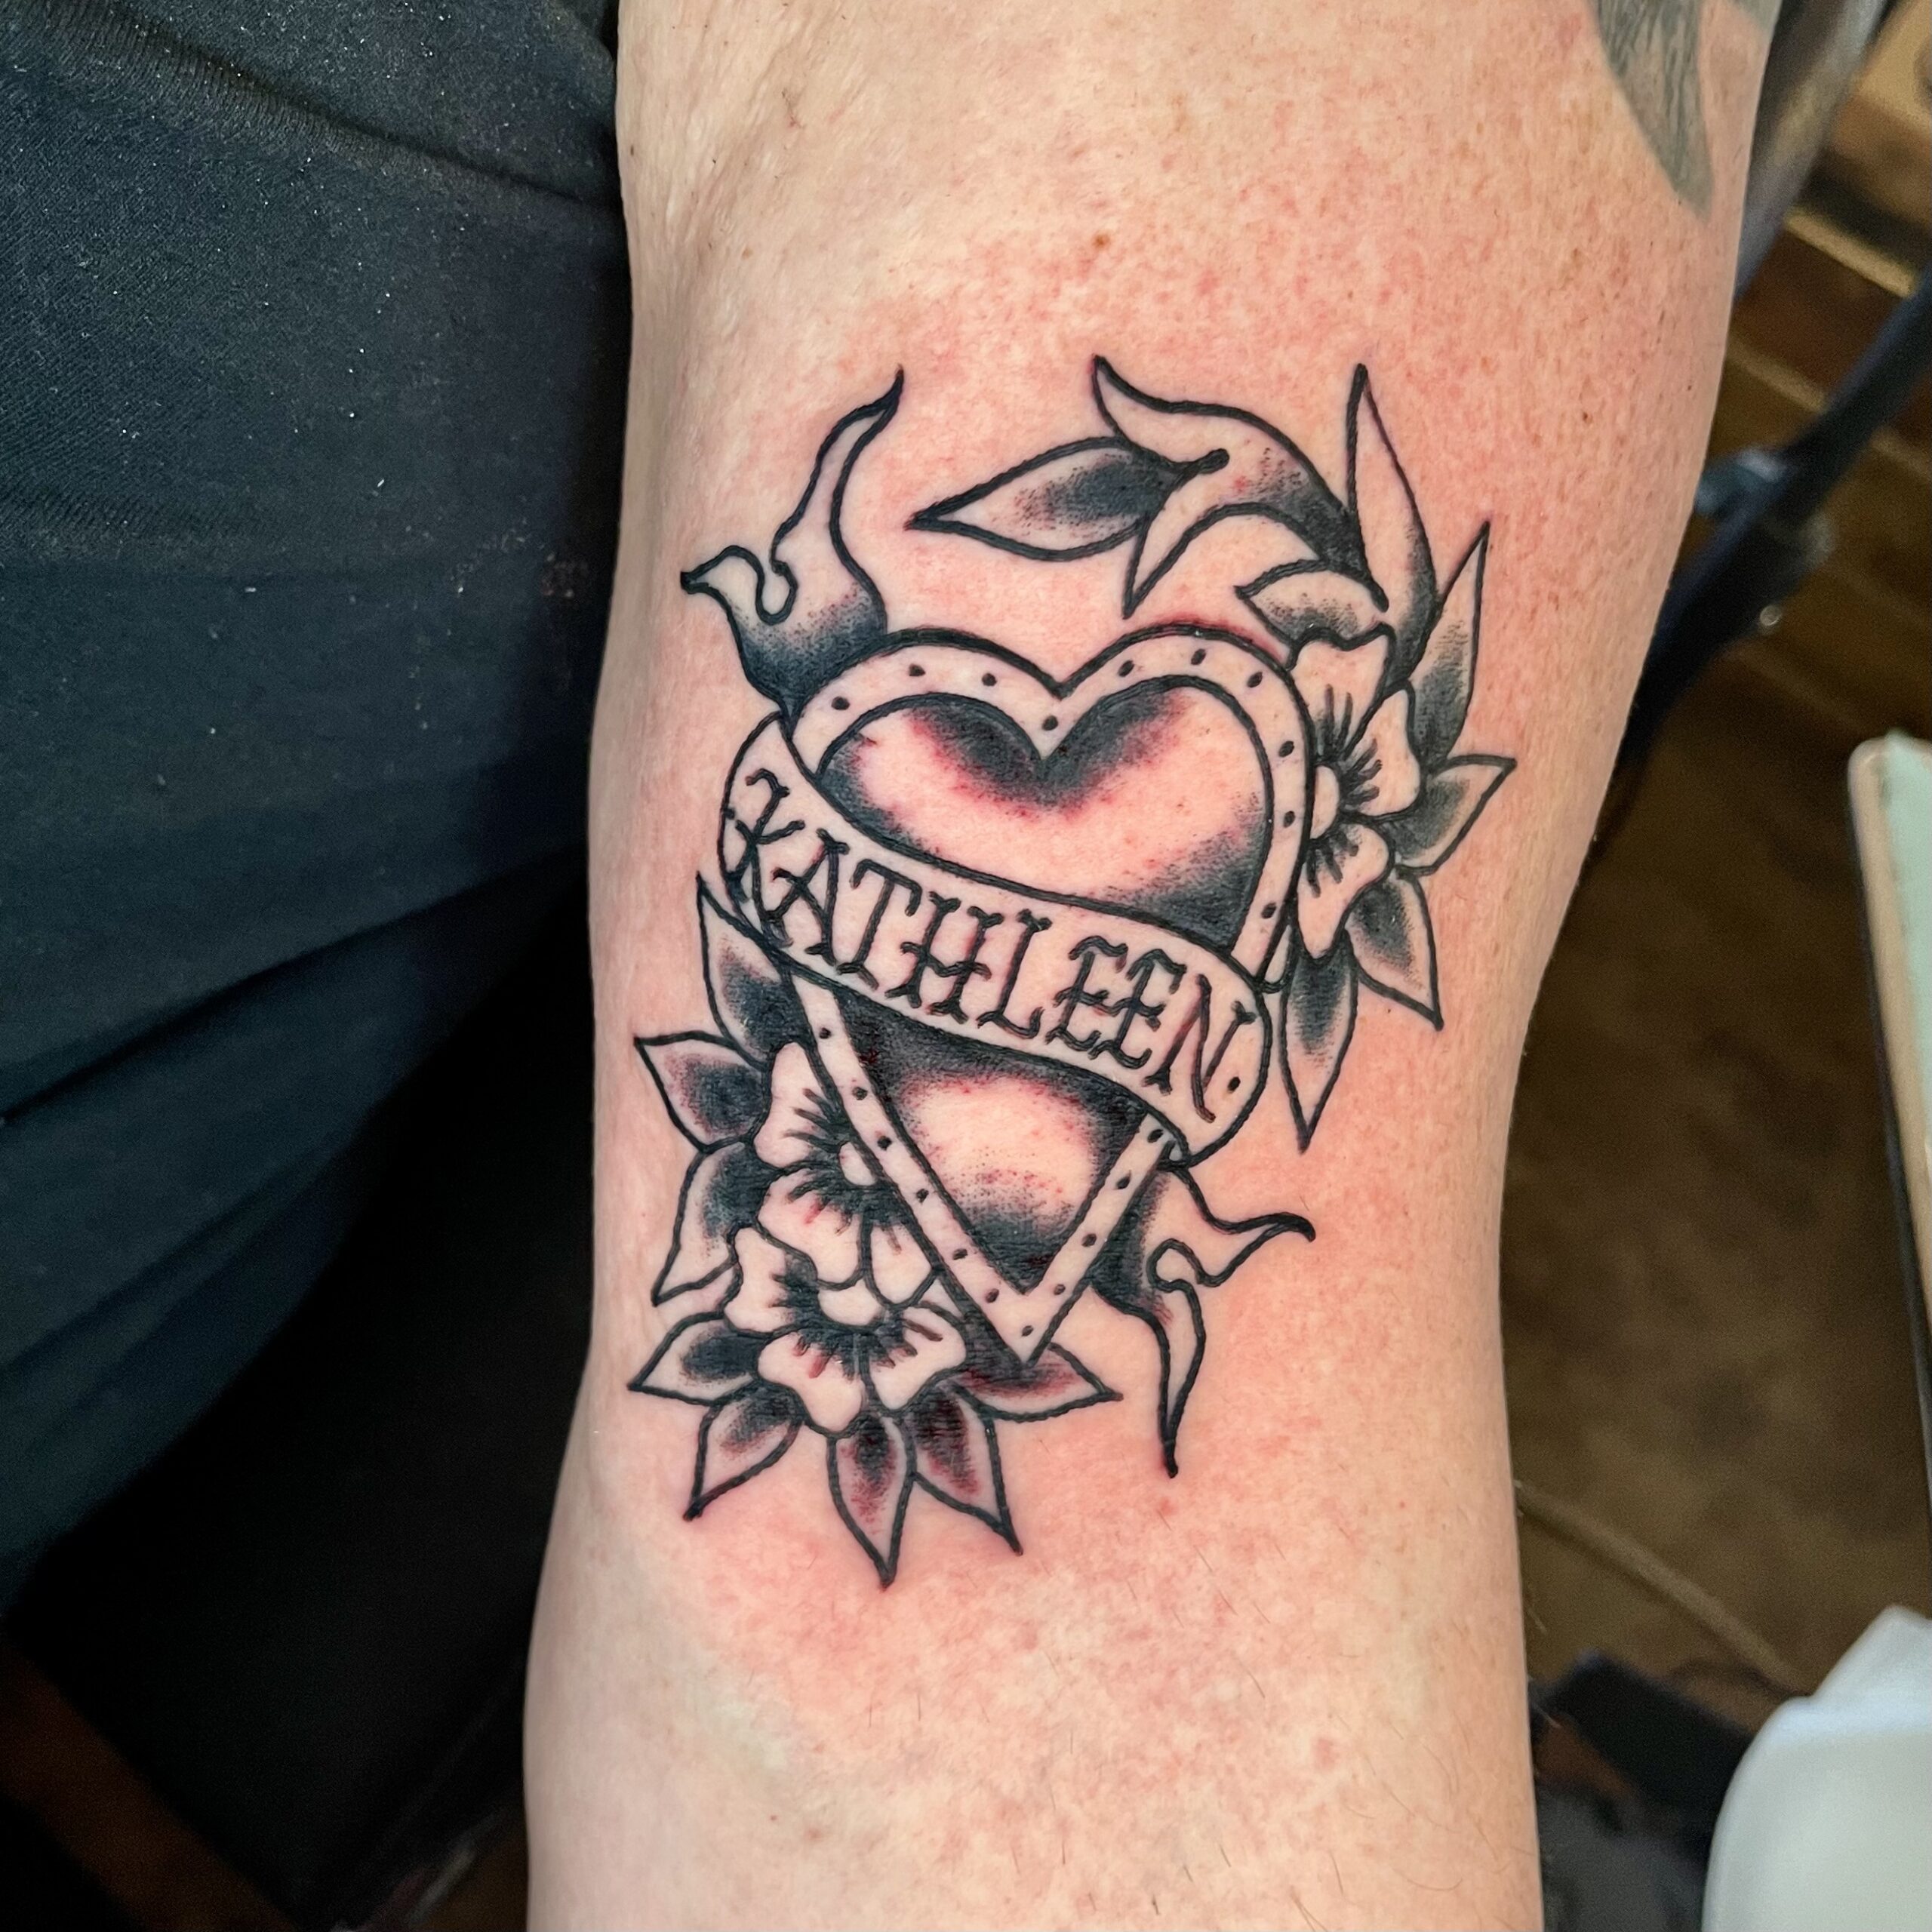 Tattoo of a heart from top tattoo shop in Dallas